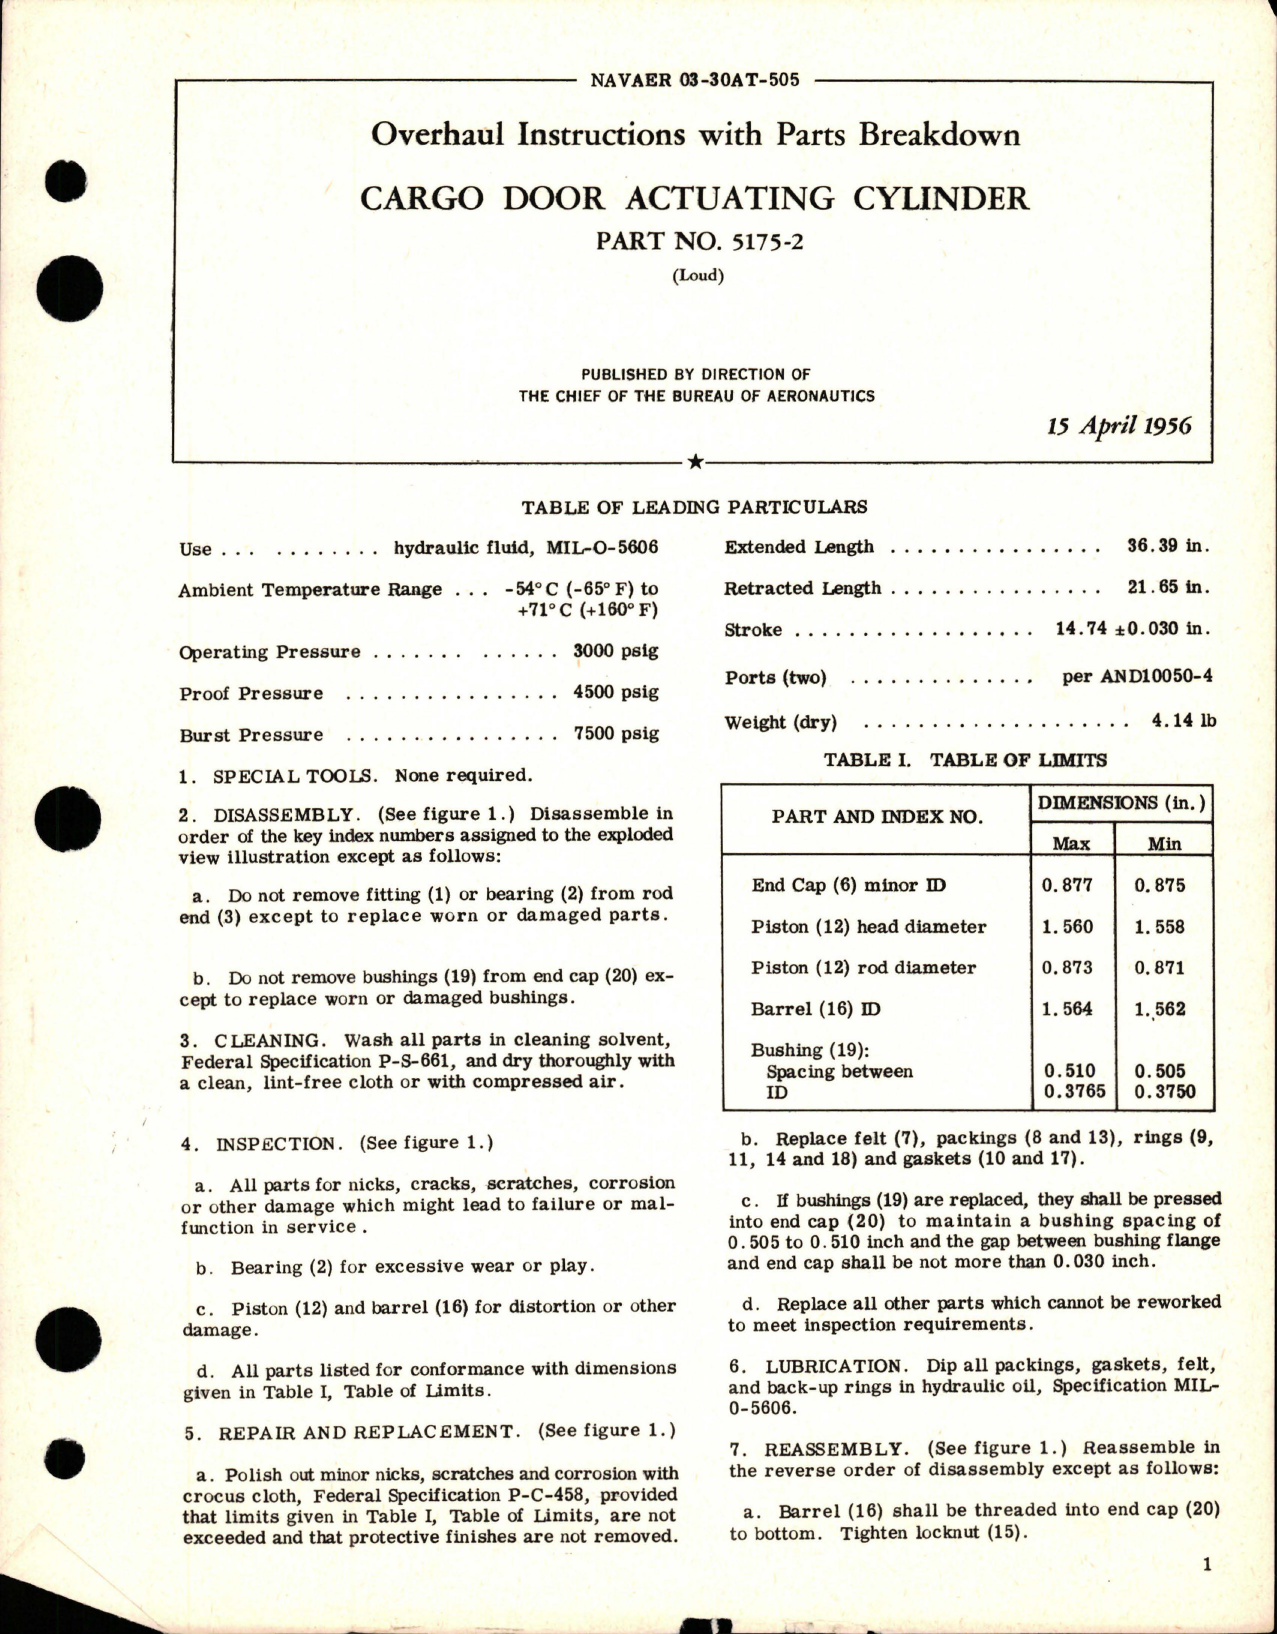 Sample page 1 from AirCorps Library document: Overhaul Instructions with Parts Breakdown for Cargo Door Actuating Cylinder - Part 5175-2